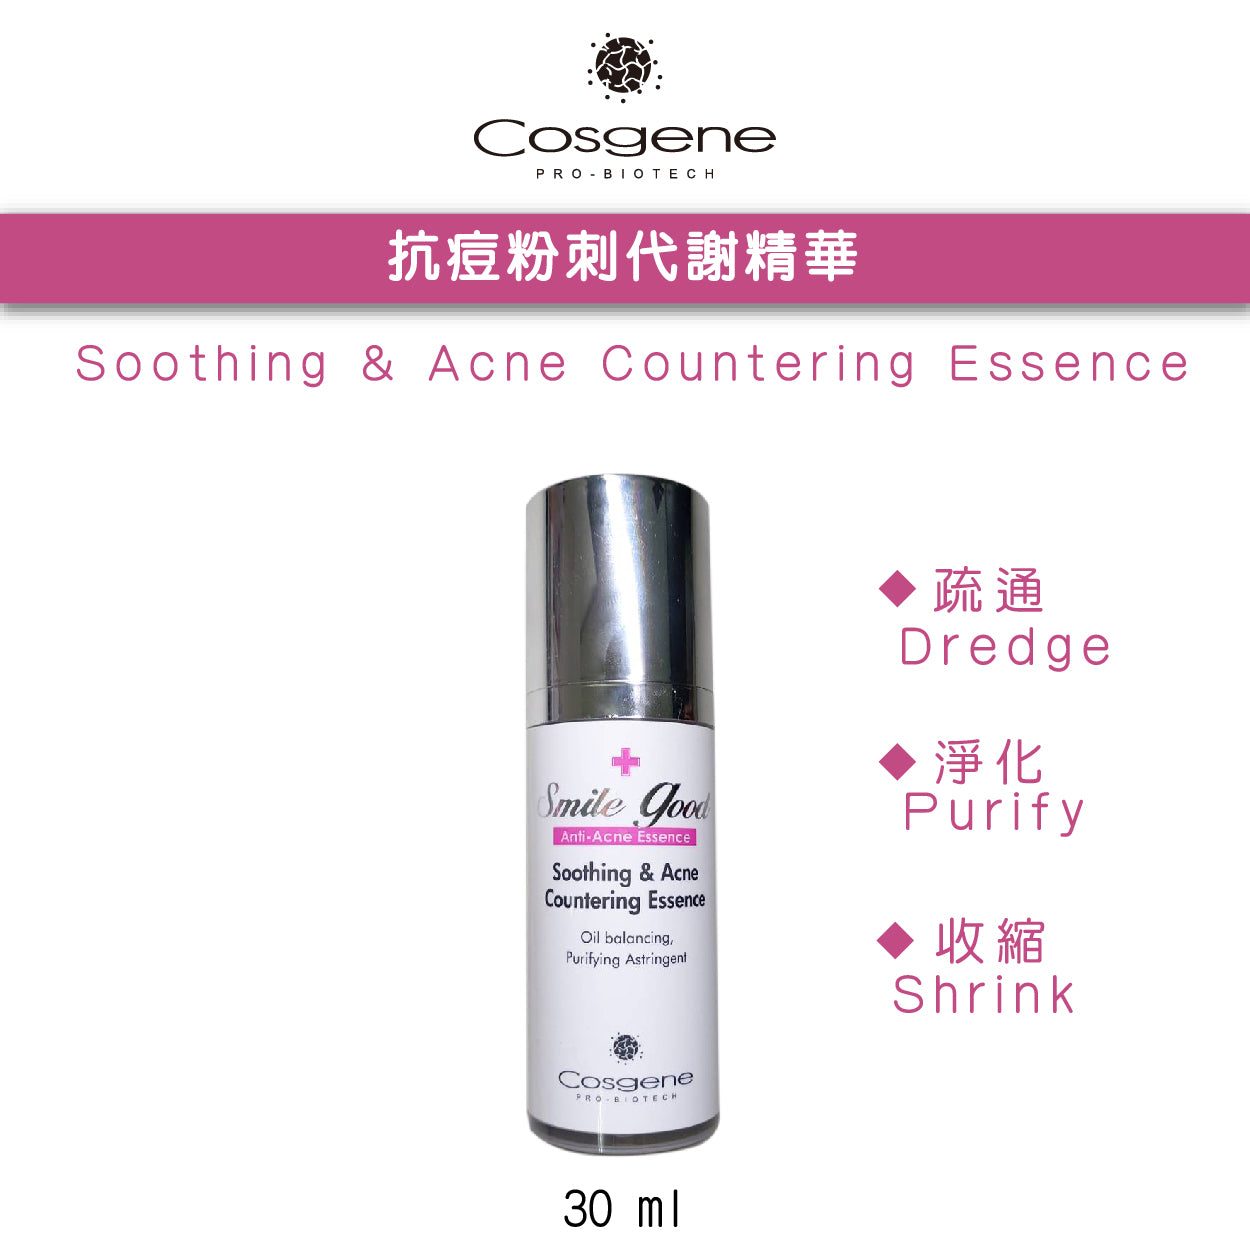 【COSGENE】Anti-Acne Countering Essence Soothing & Acne Countering Essence